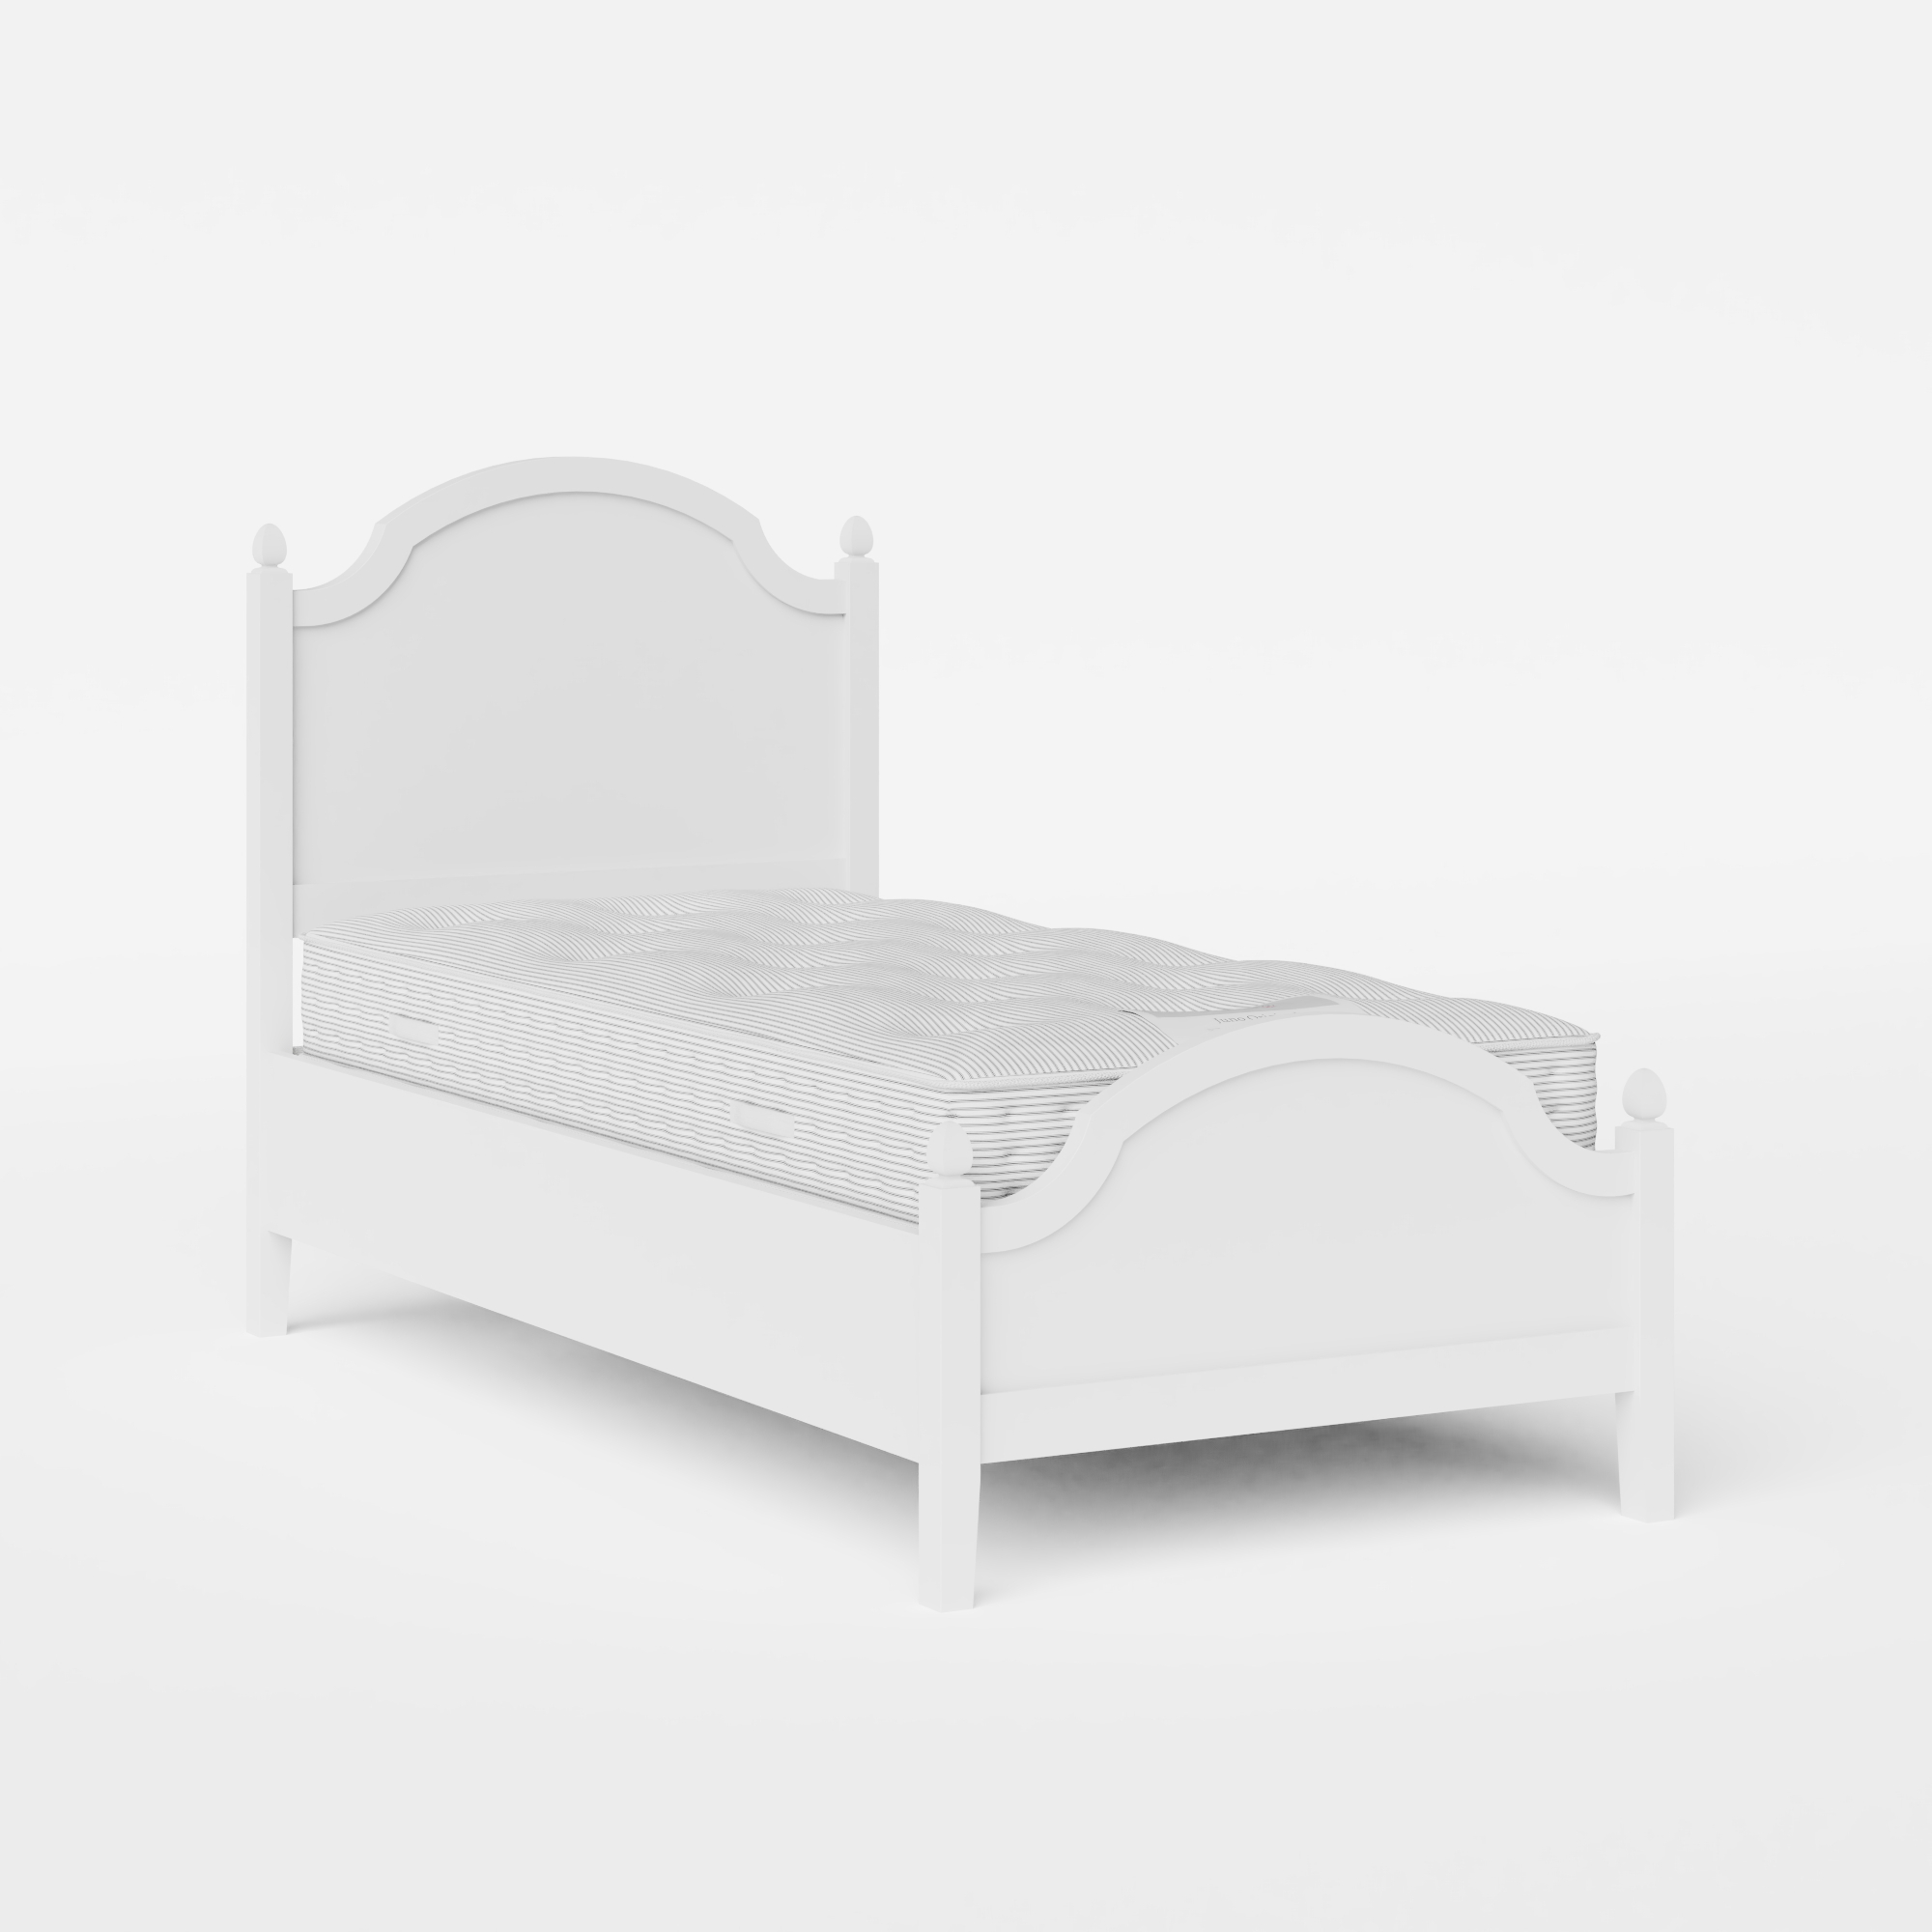 Kipling Low Footend Painted letto singolo in legno bianco con materasso